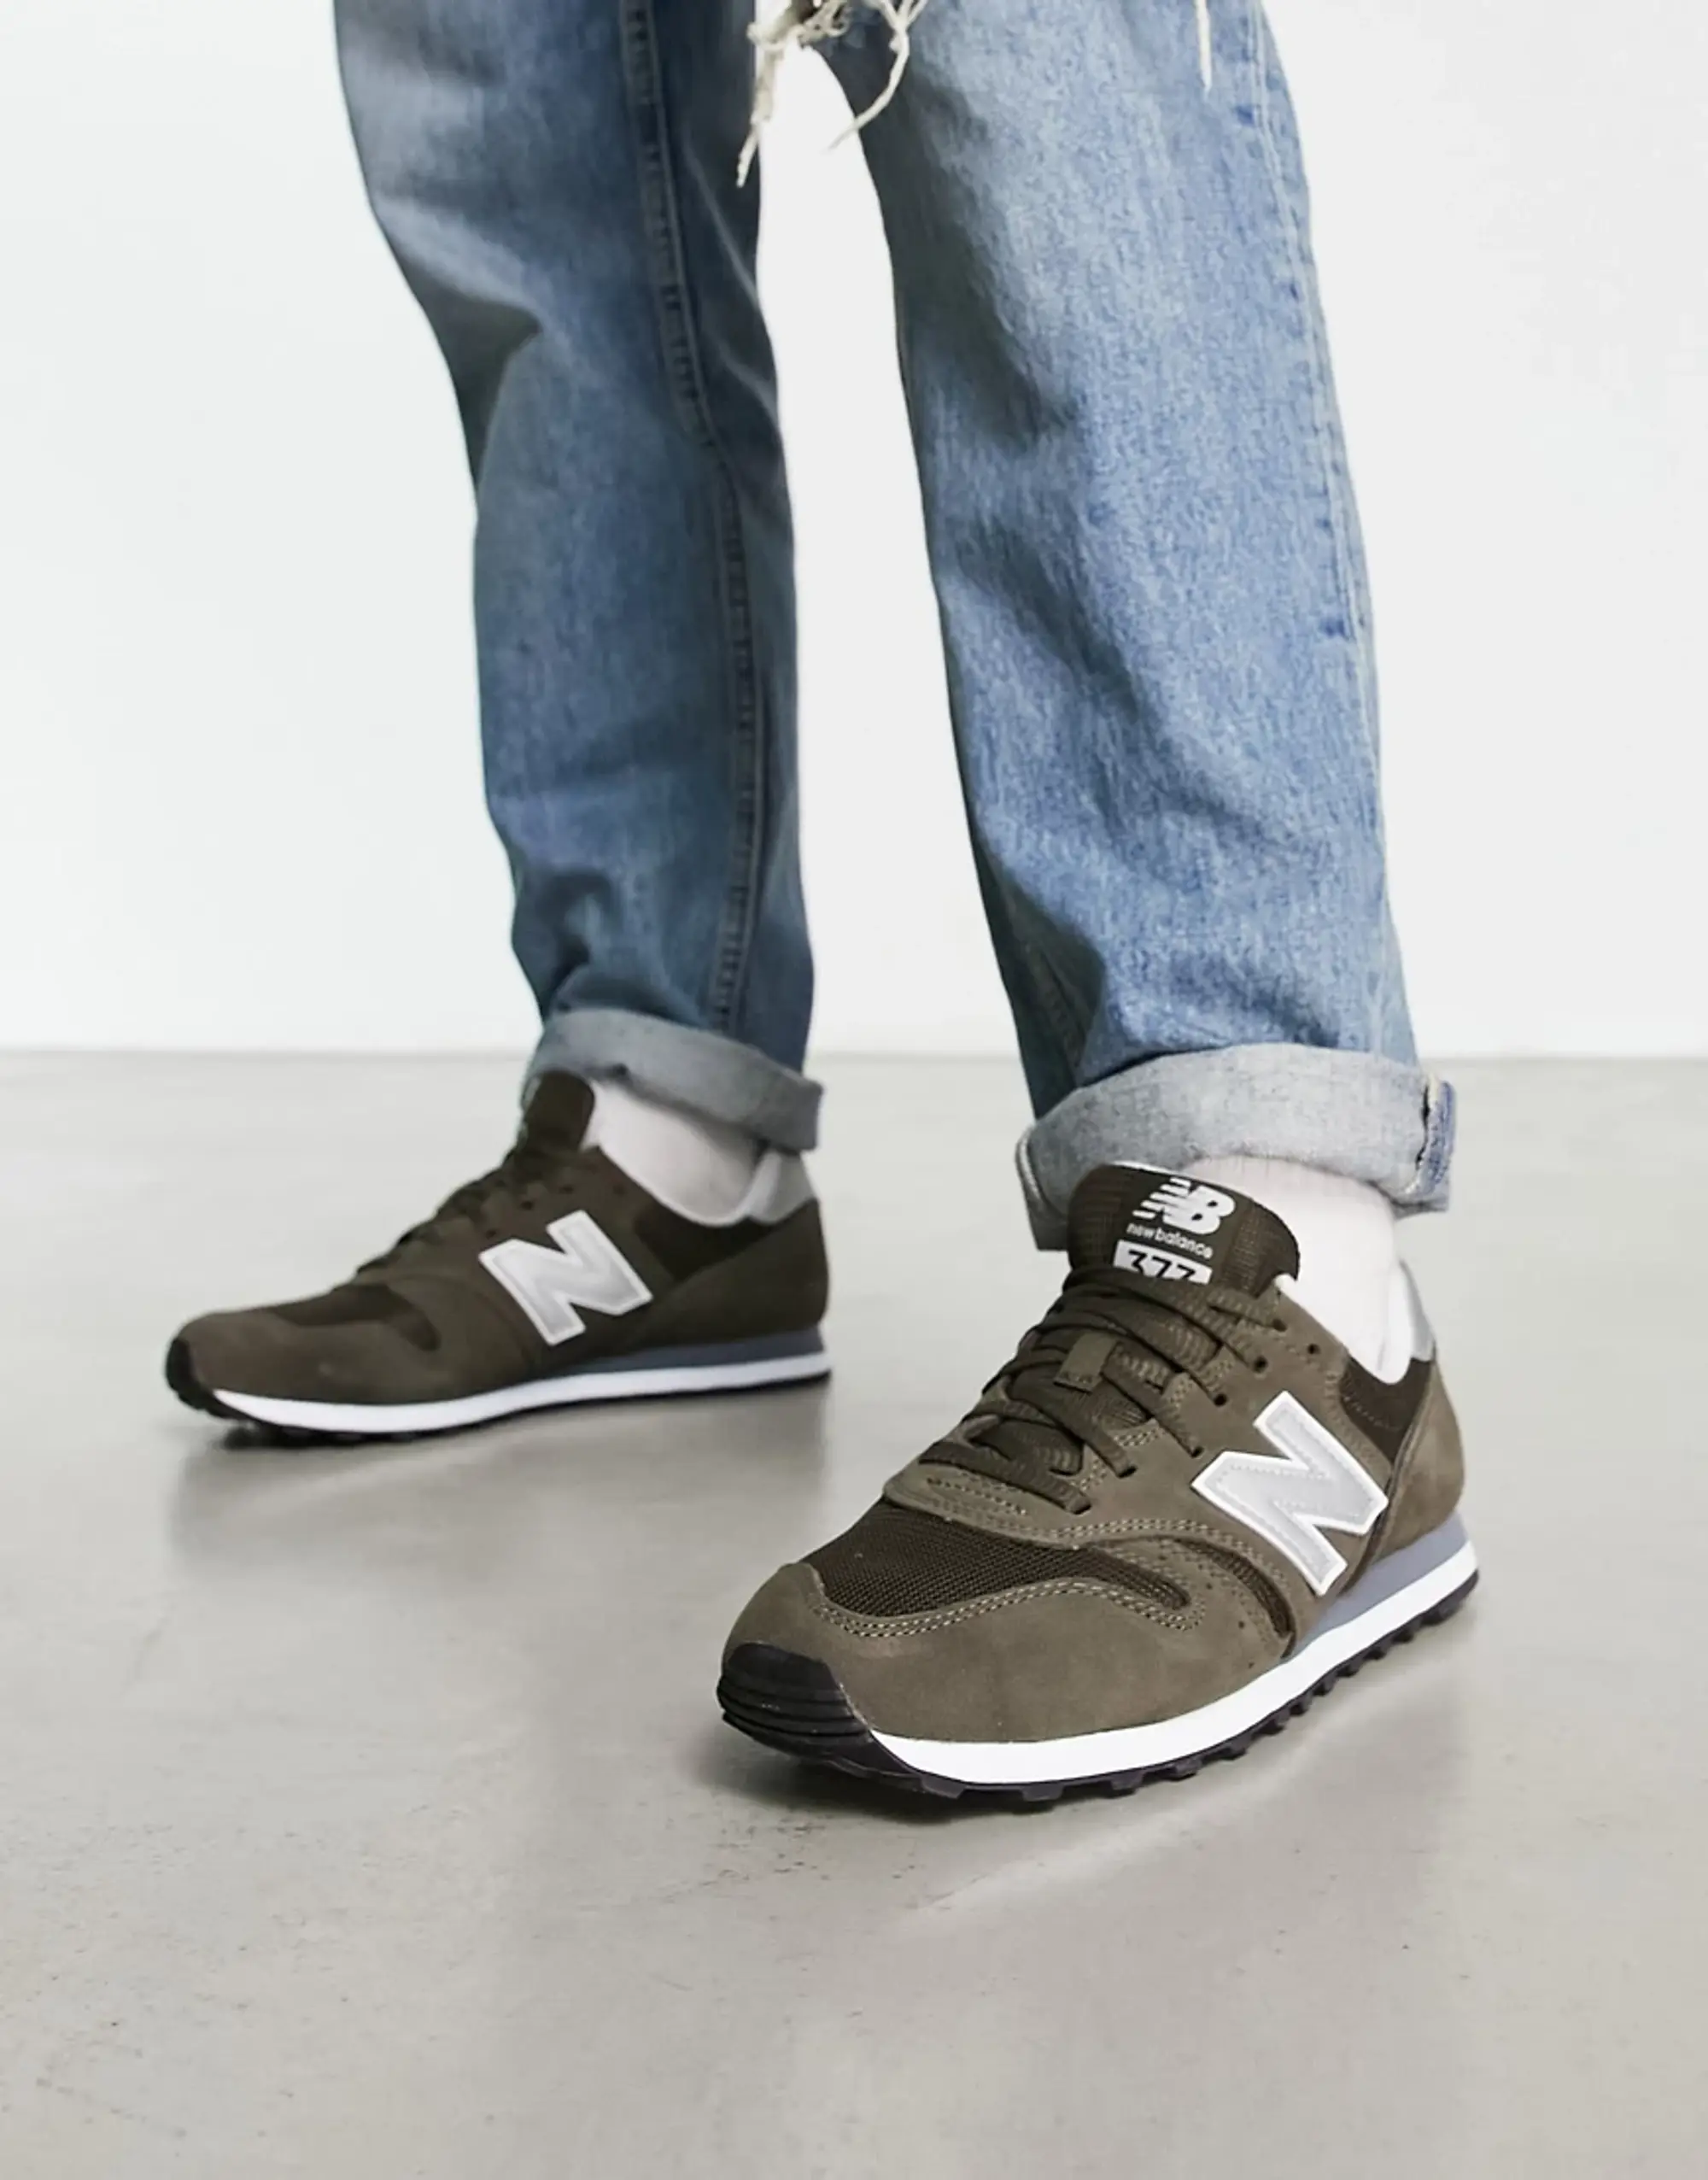 New Balance 373 Trainers In Khaki And Off White-Green